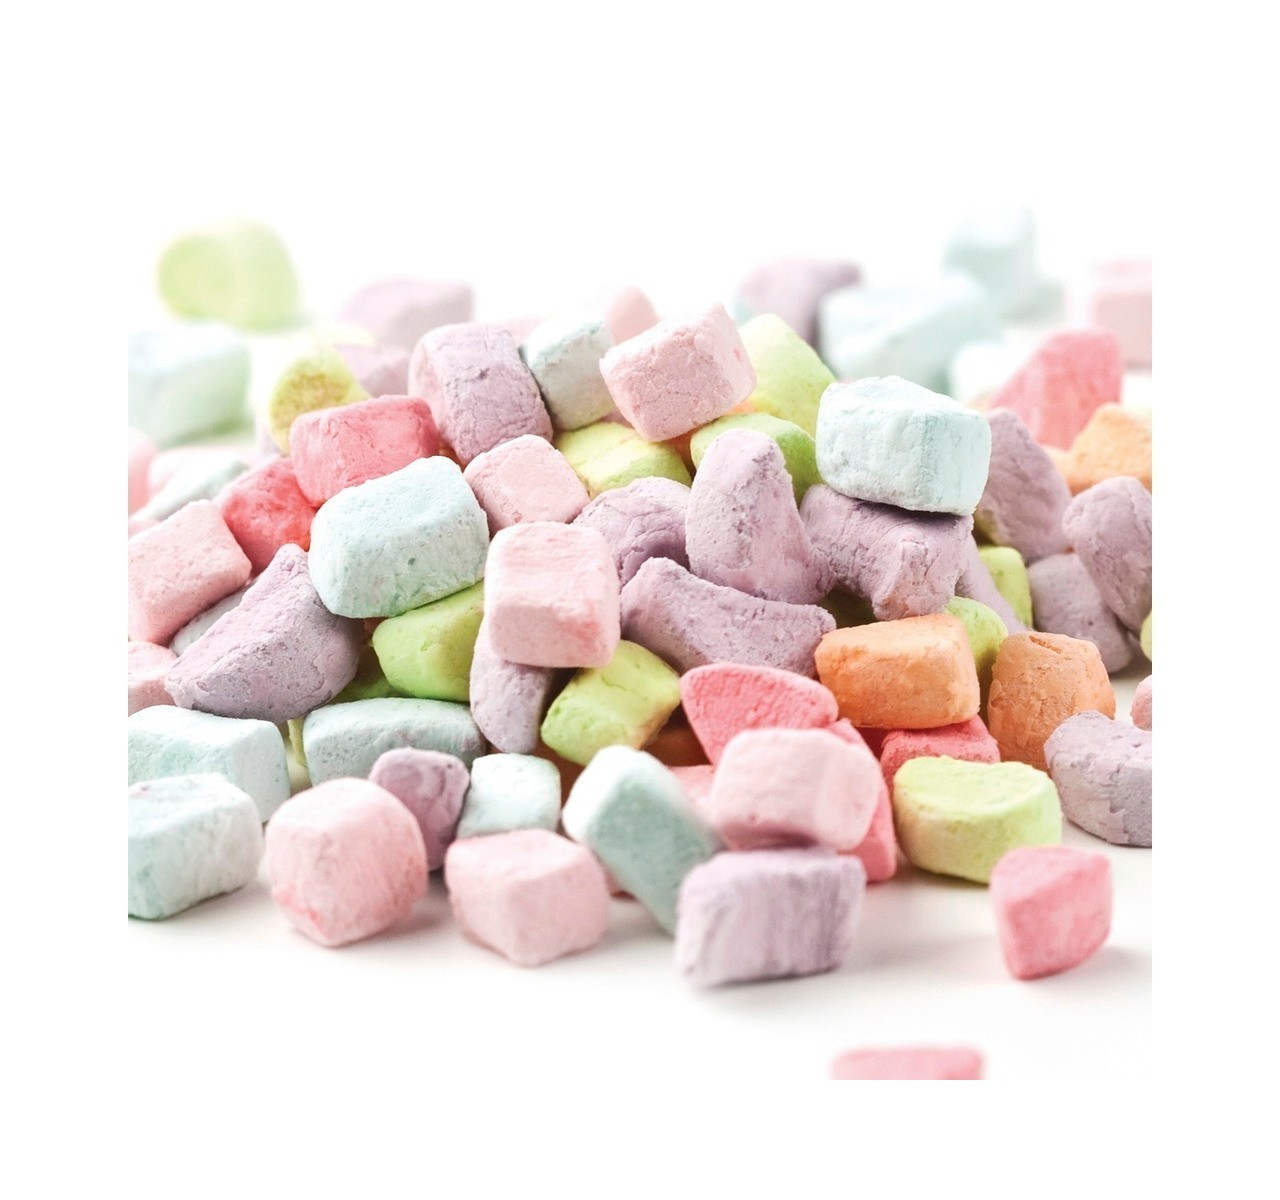 How to Dehydrate Marshmallows & Make Marshmallow Powder - The